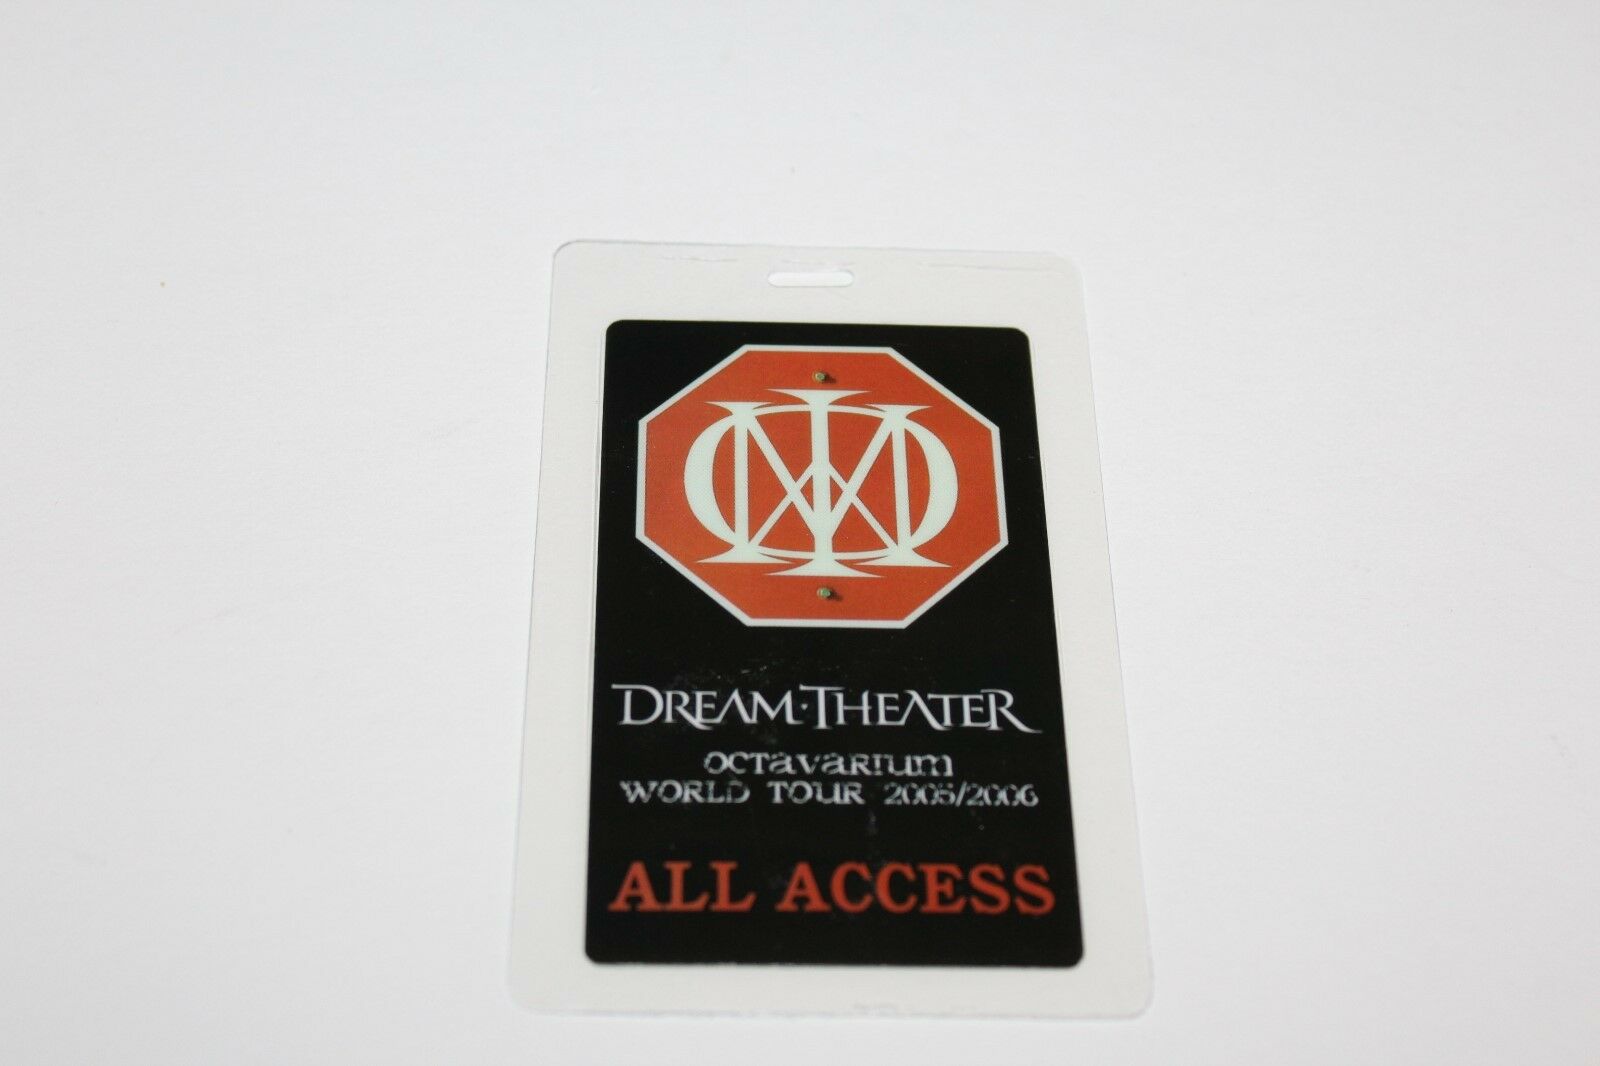 Dream Theater - Laminated Backstage Pass - Lot # 5  - FREE POSTAGE